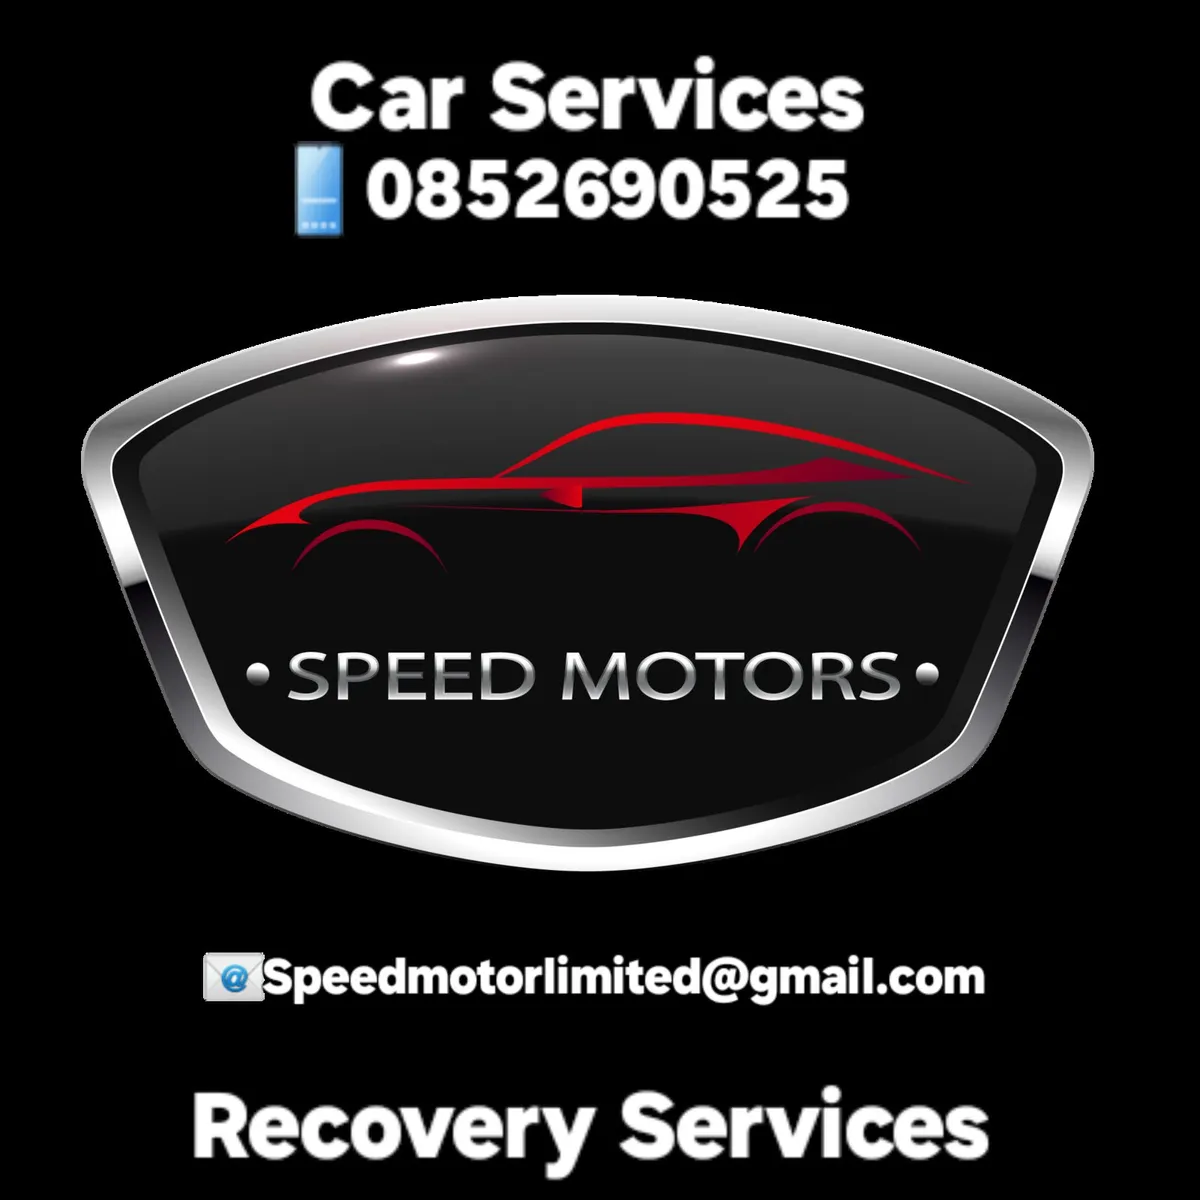 Car Services,  Recovery Breakdown,  Car Detailing